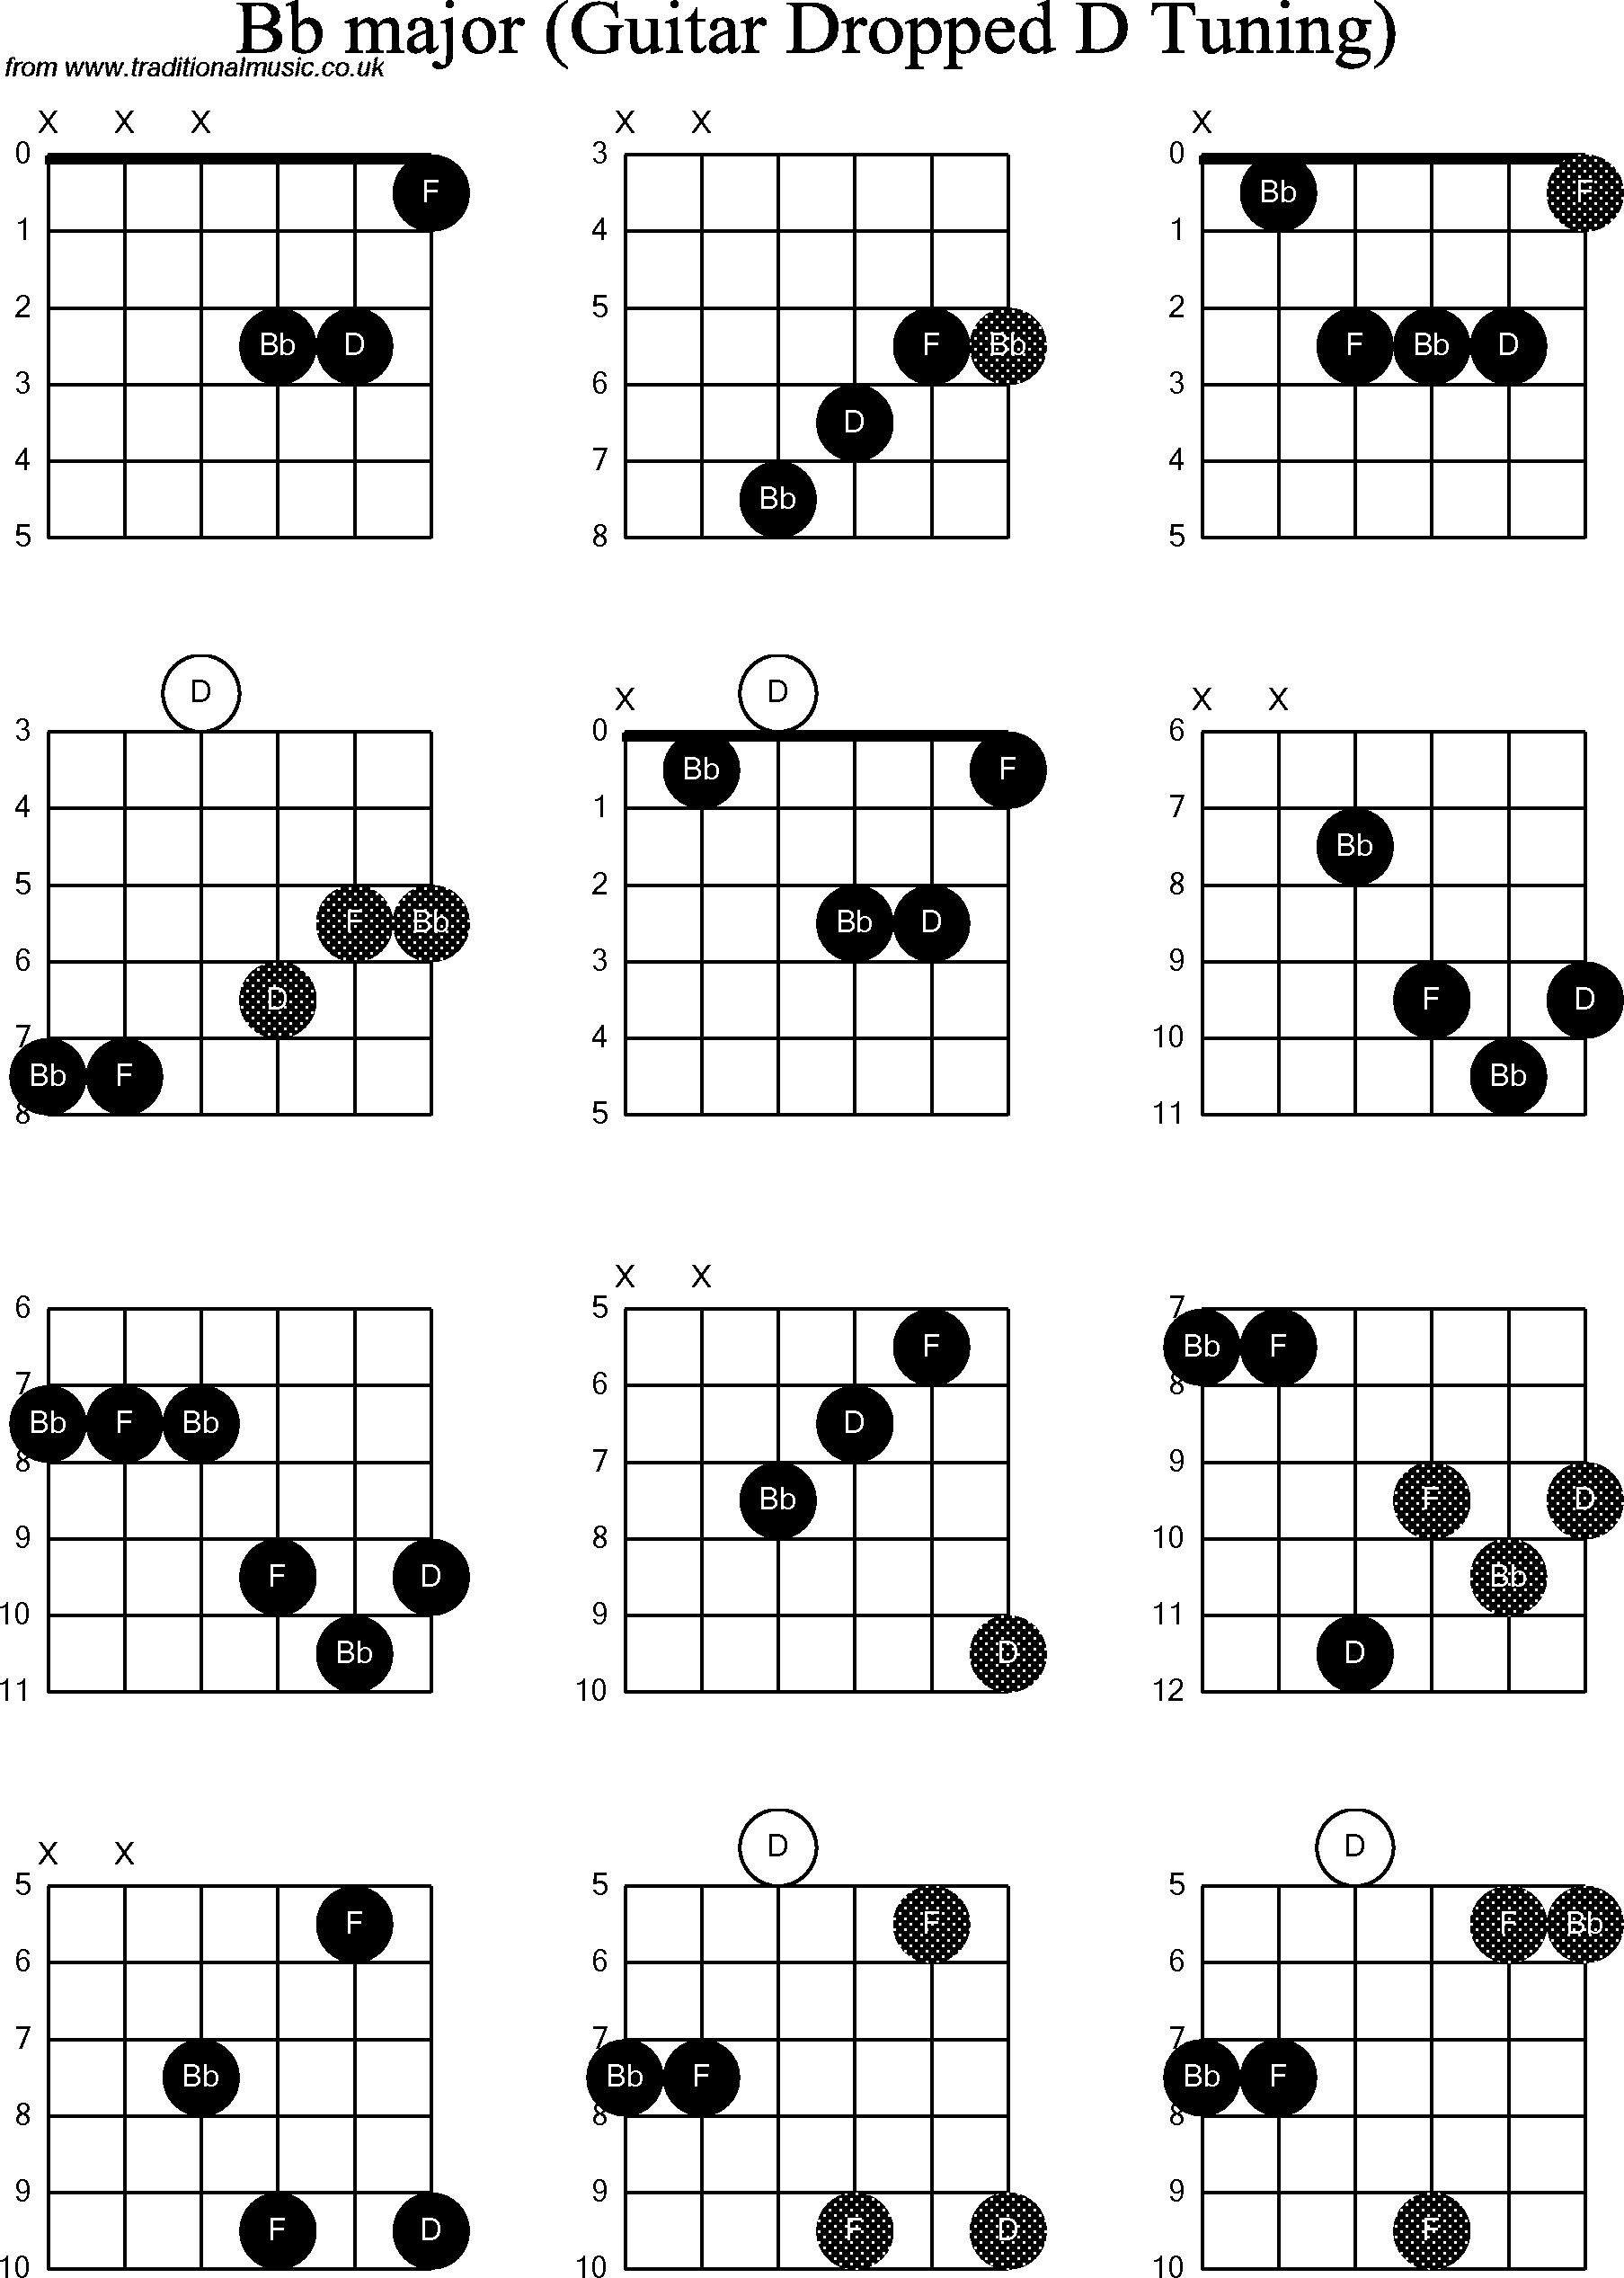 Chord diagrams for dropped D Guitar(DADGBE), Bb